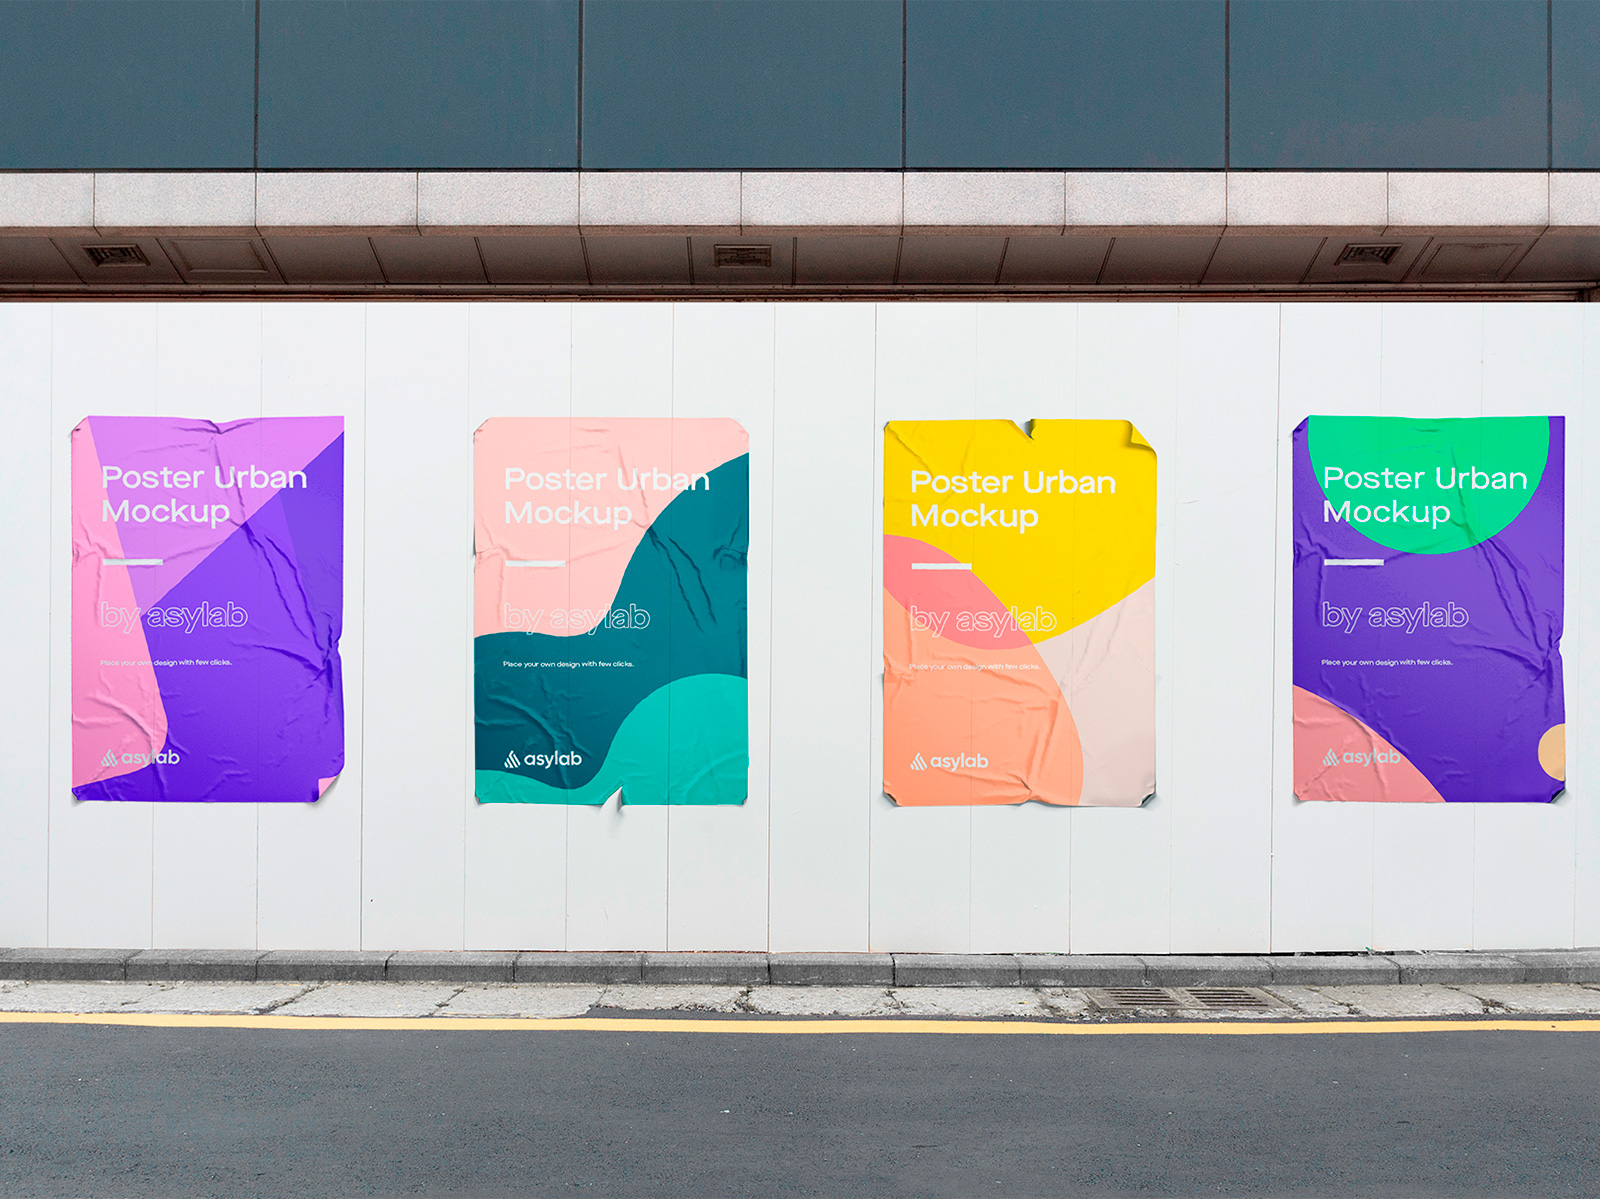 Download 10 Urban Poster Street Mockups Psd By Asylab On Dribbble PSD Mockup Templates